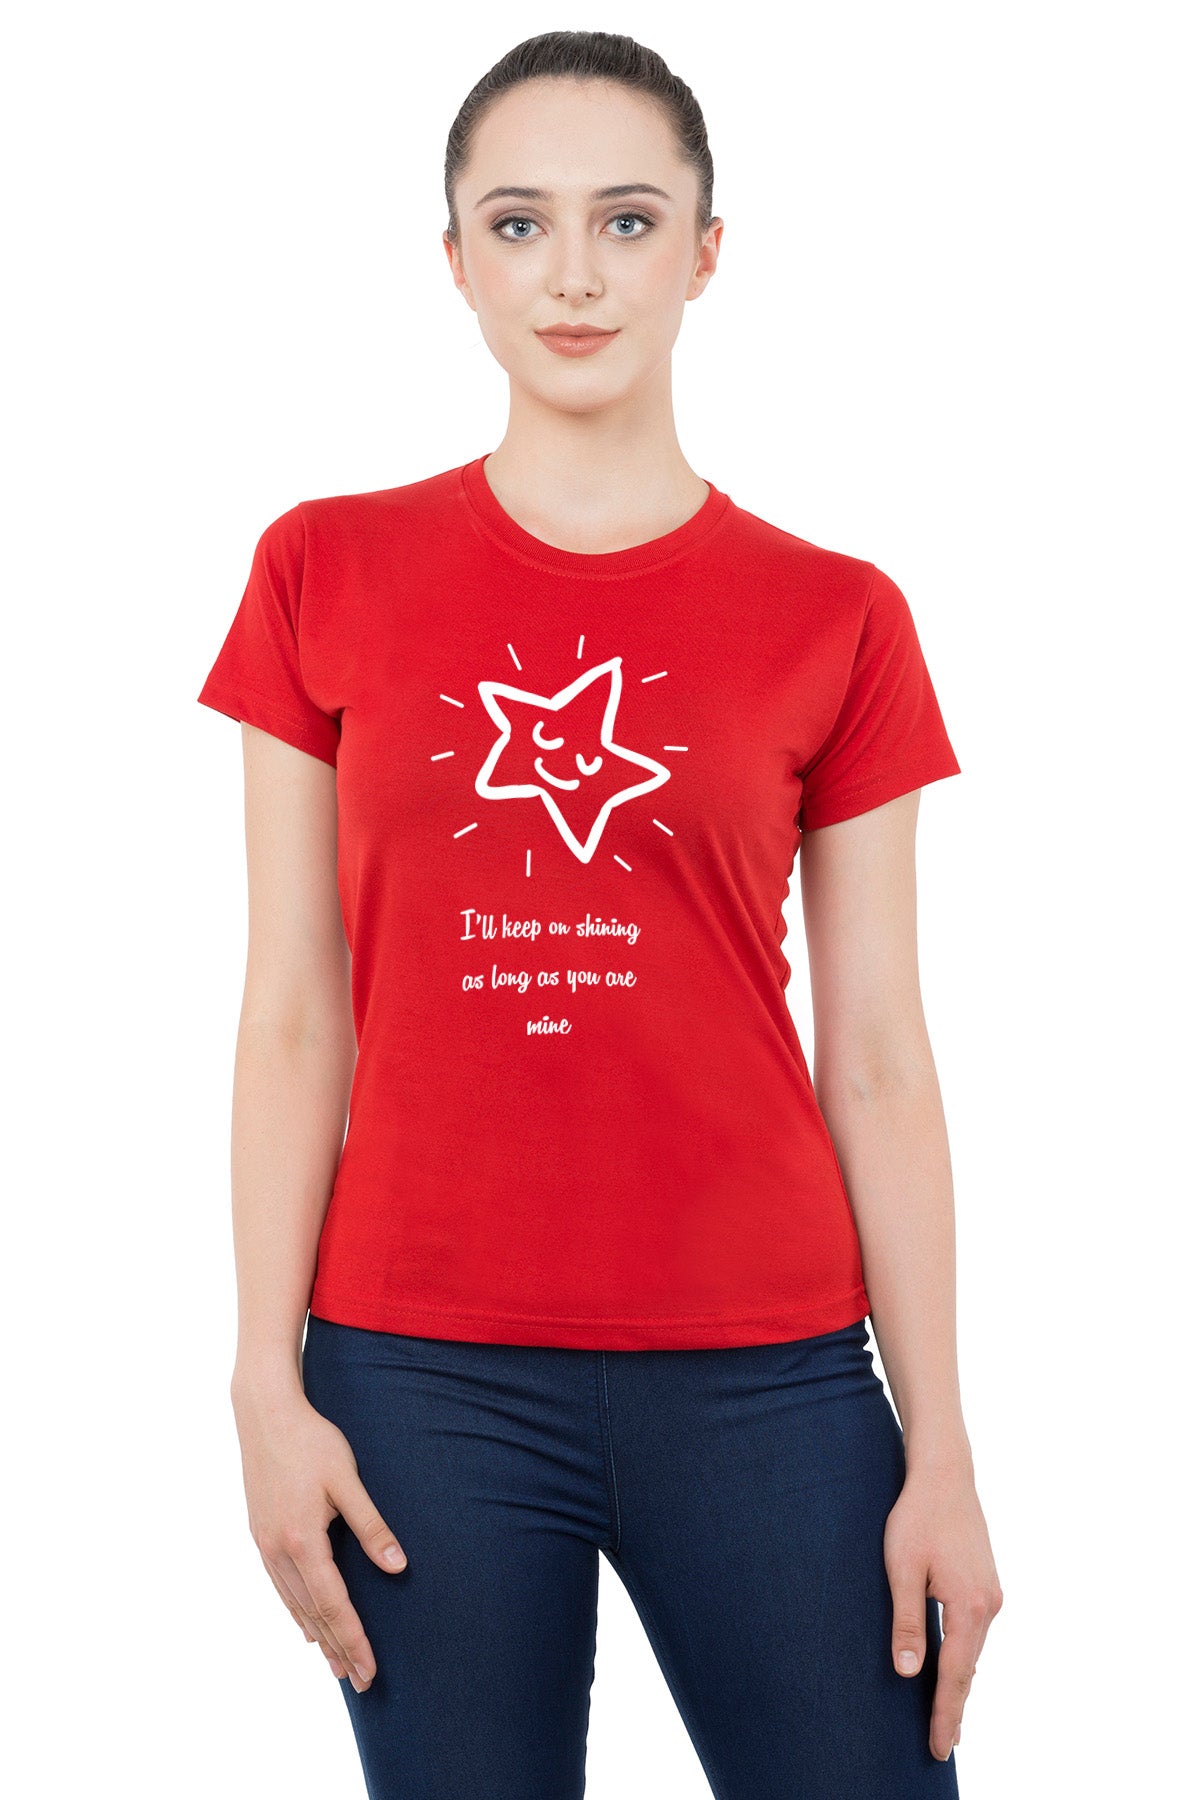 Moon Star matching Couple T shirts- Red